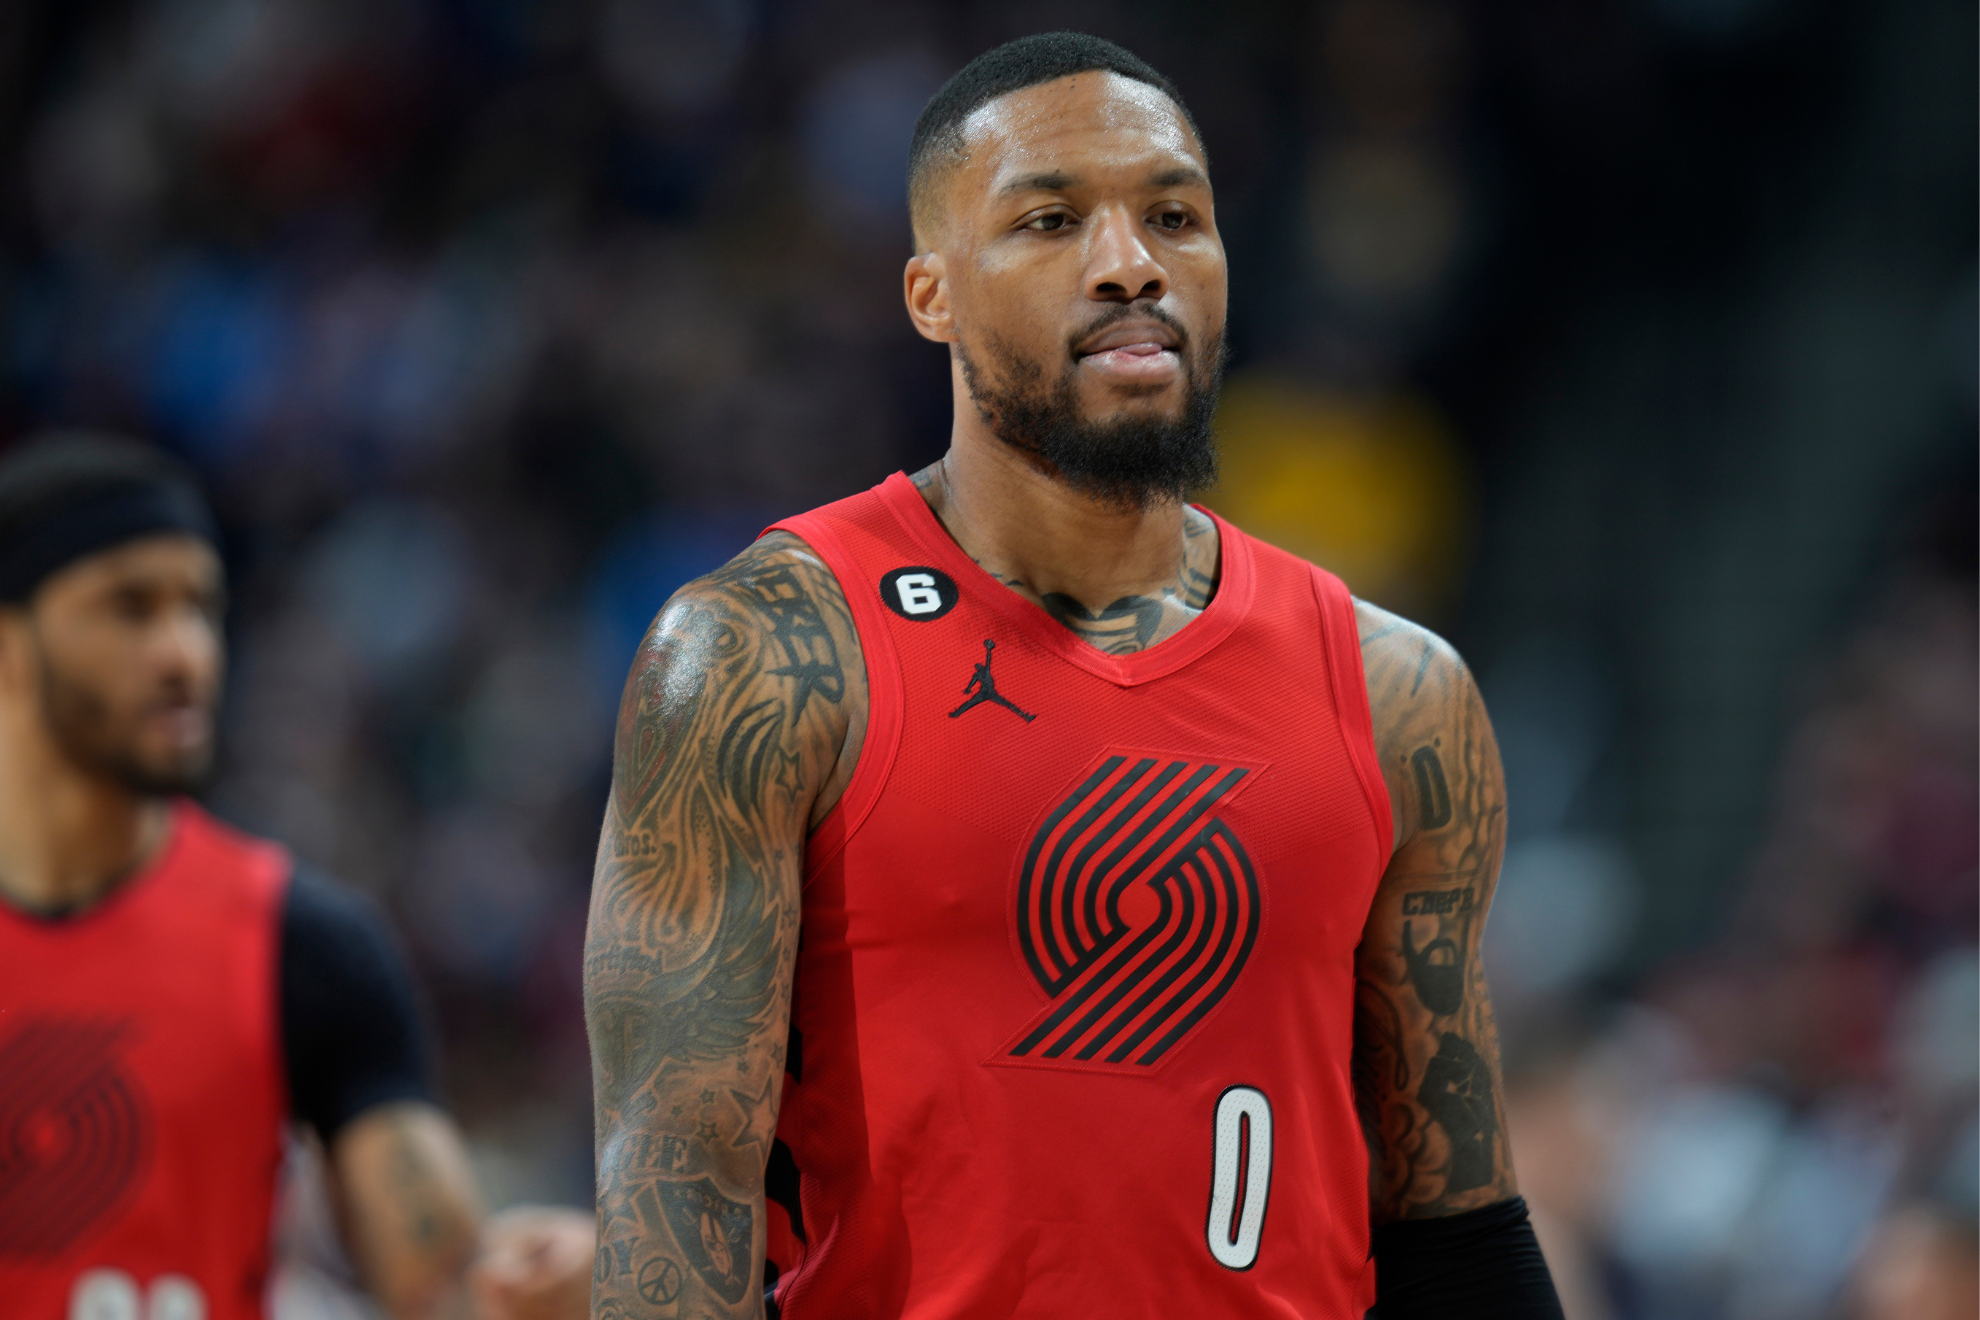 Lillard and Blazers management are deciding the best way forward.